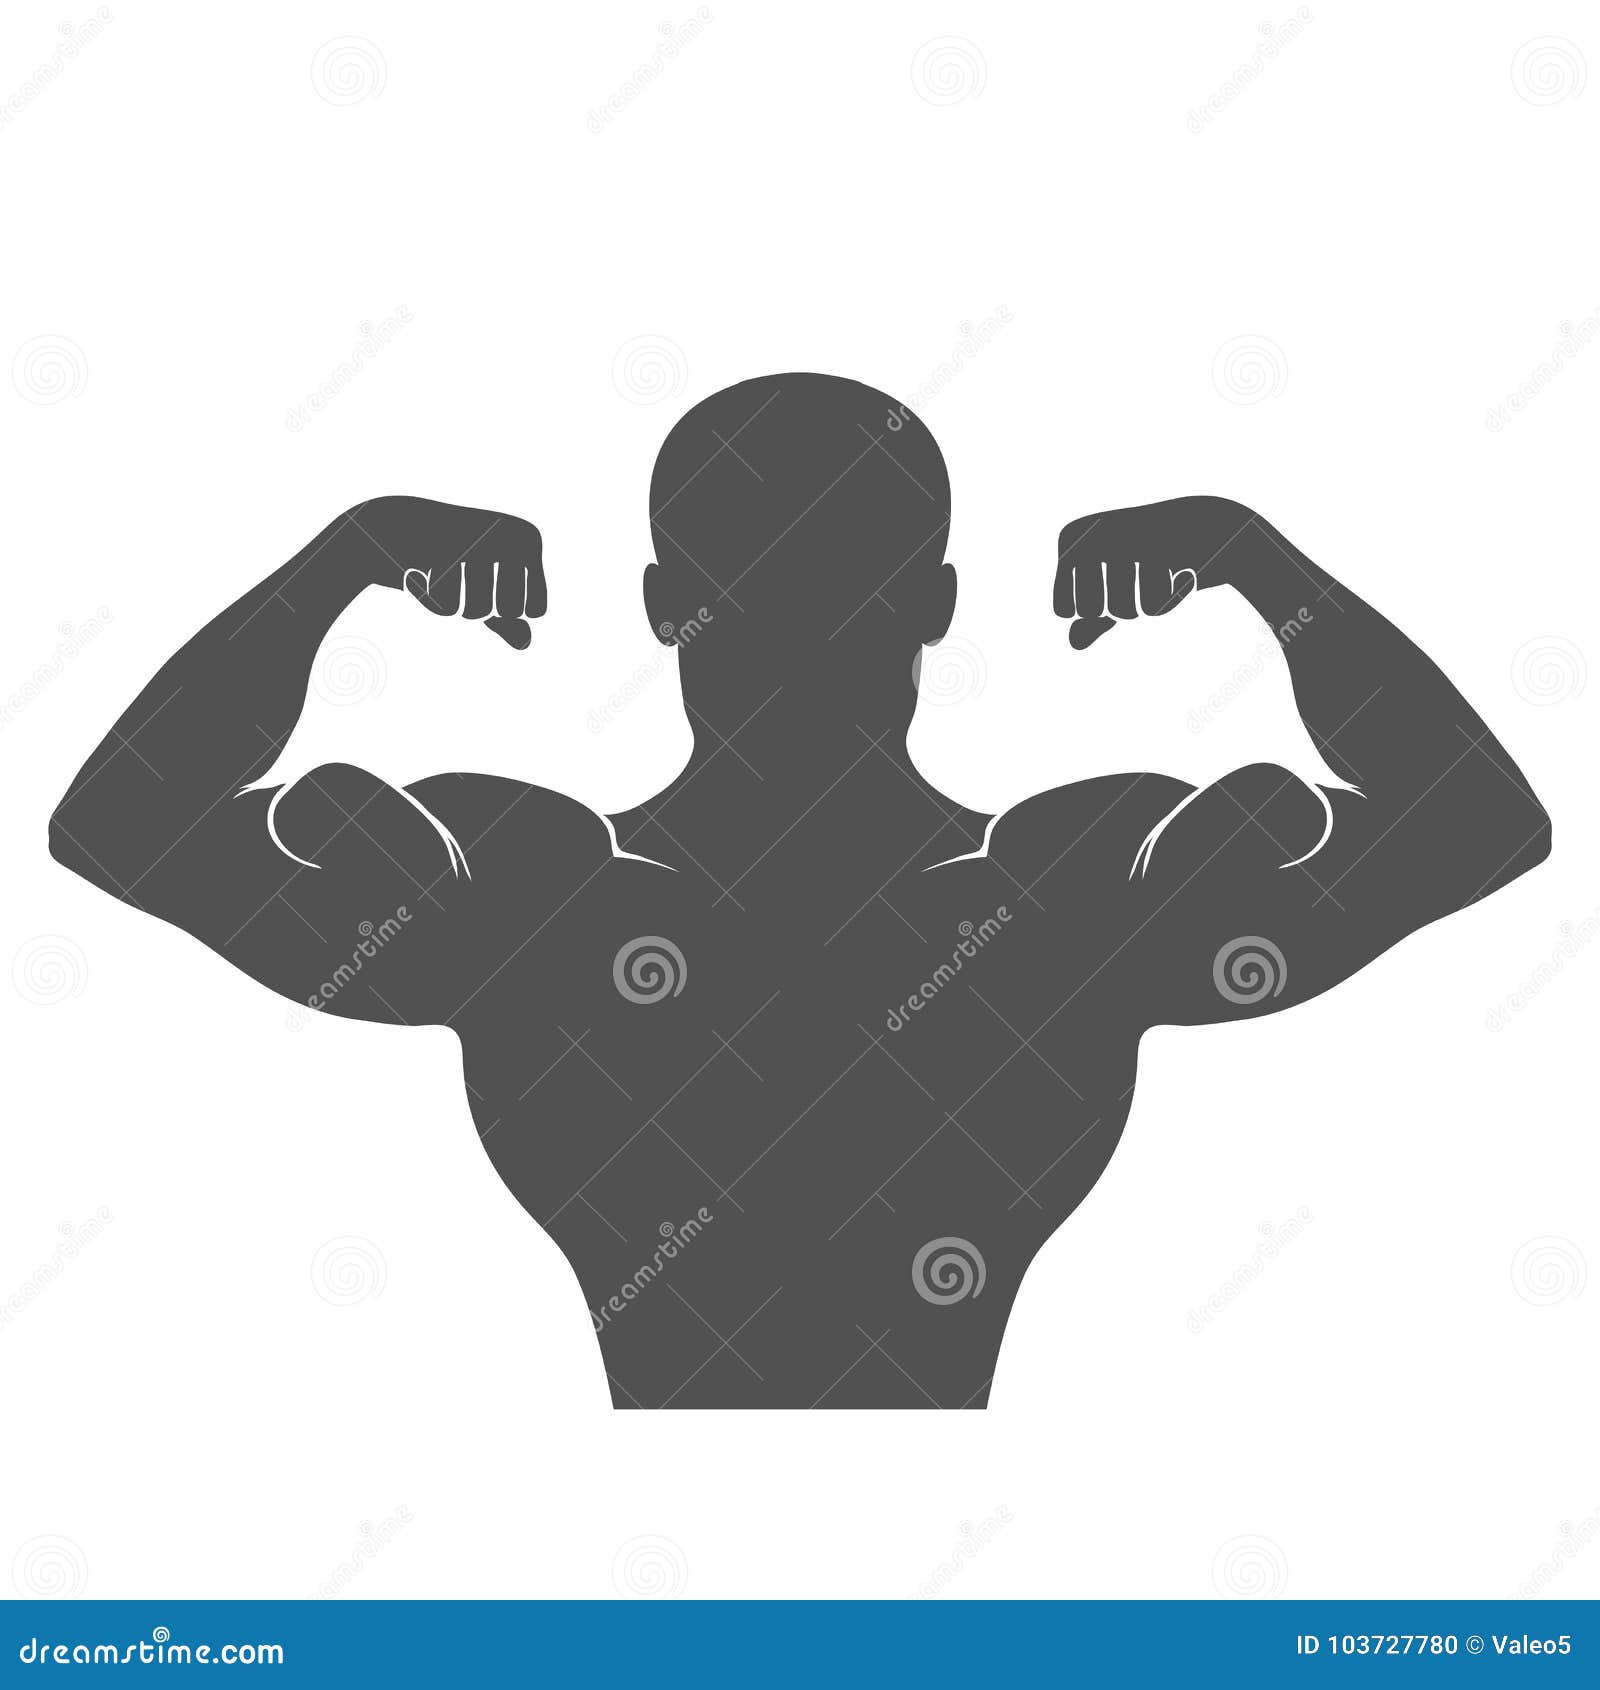 Front double biceps pose stock illustration. Illustration of bicep ...